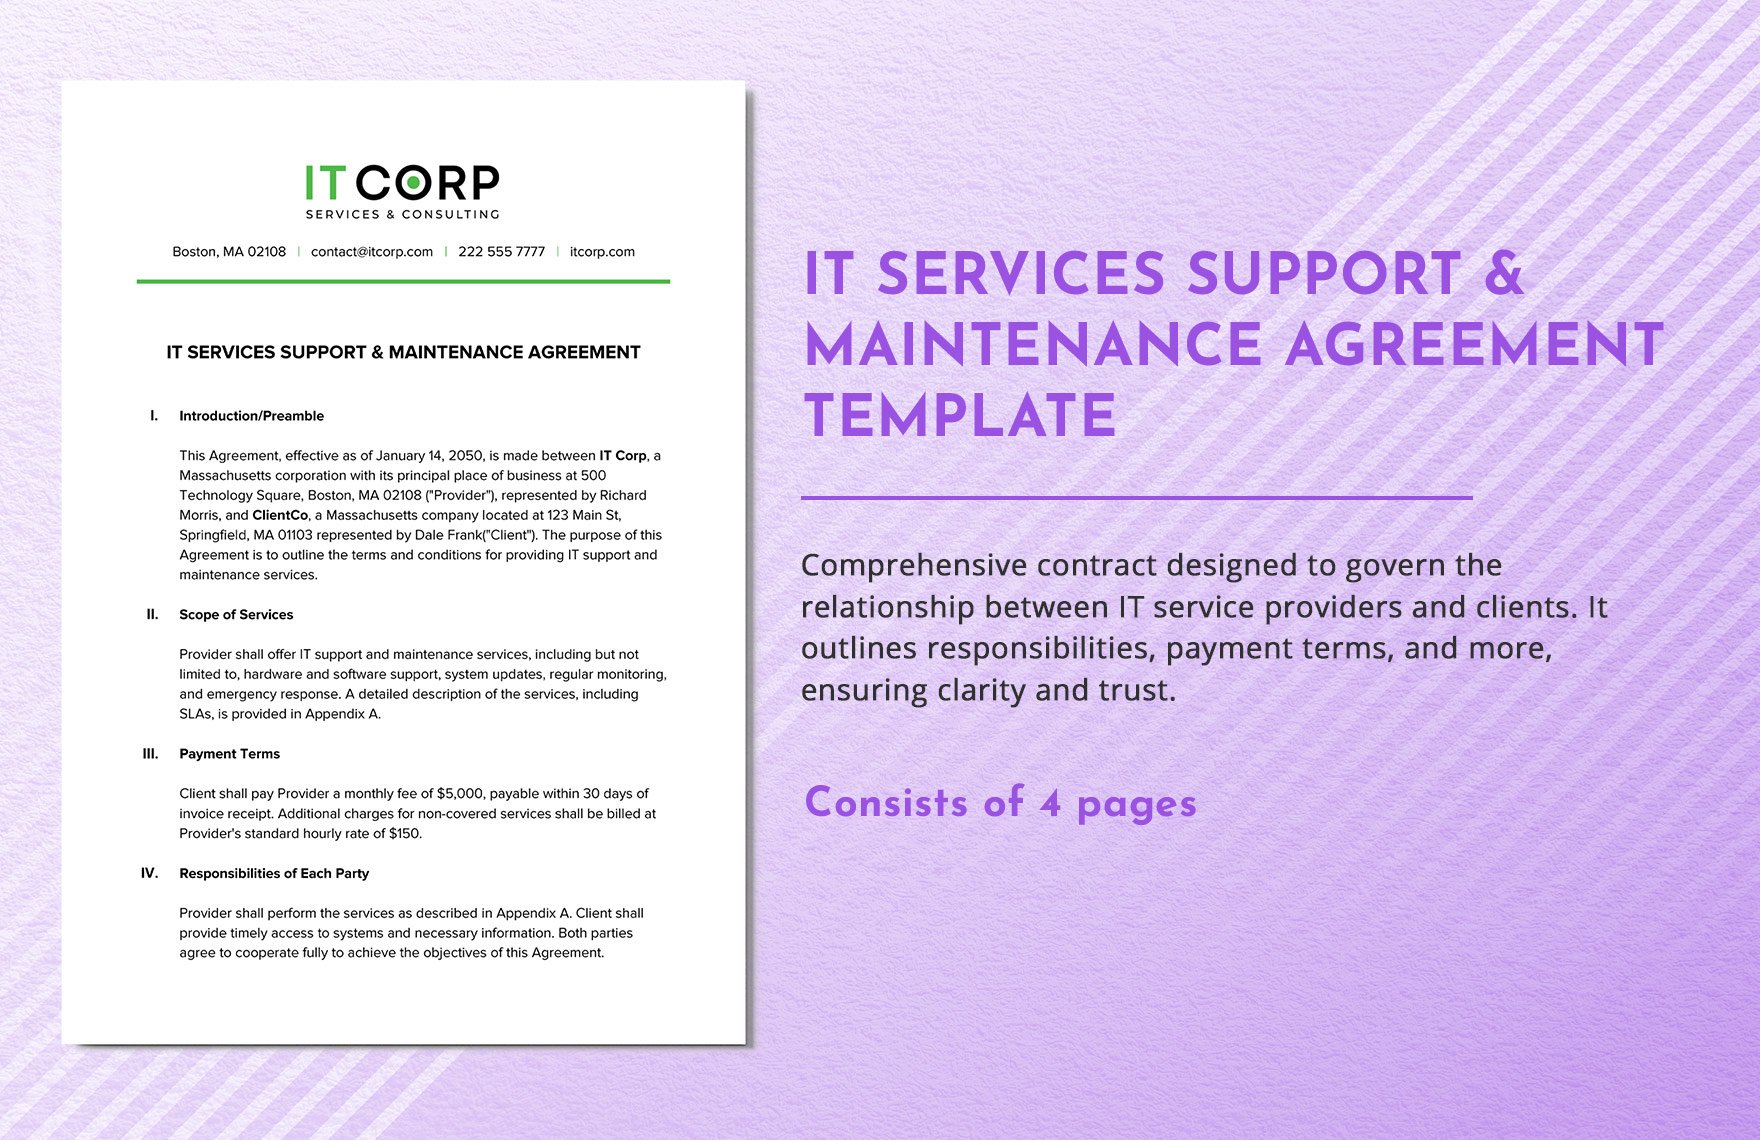 IT Services Support & Maintenance Agreement Template